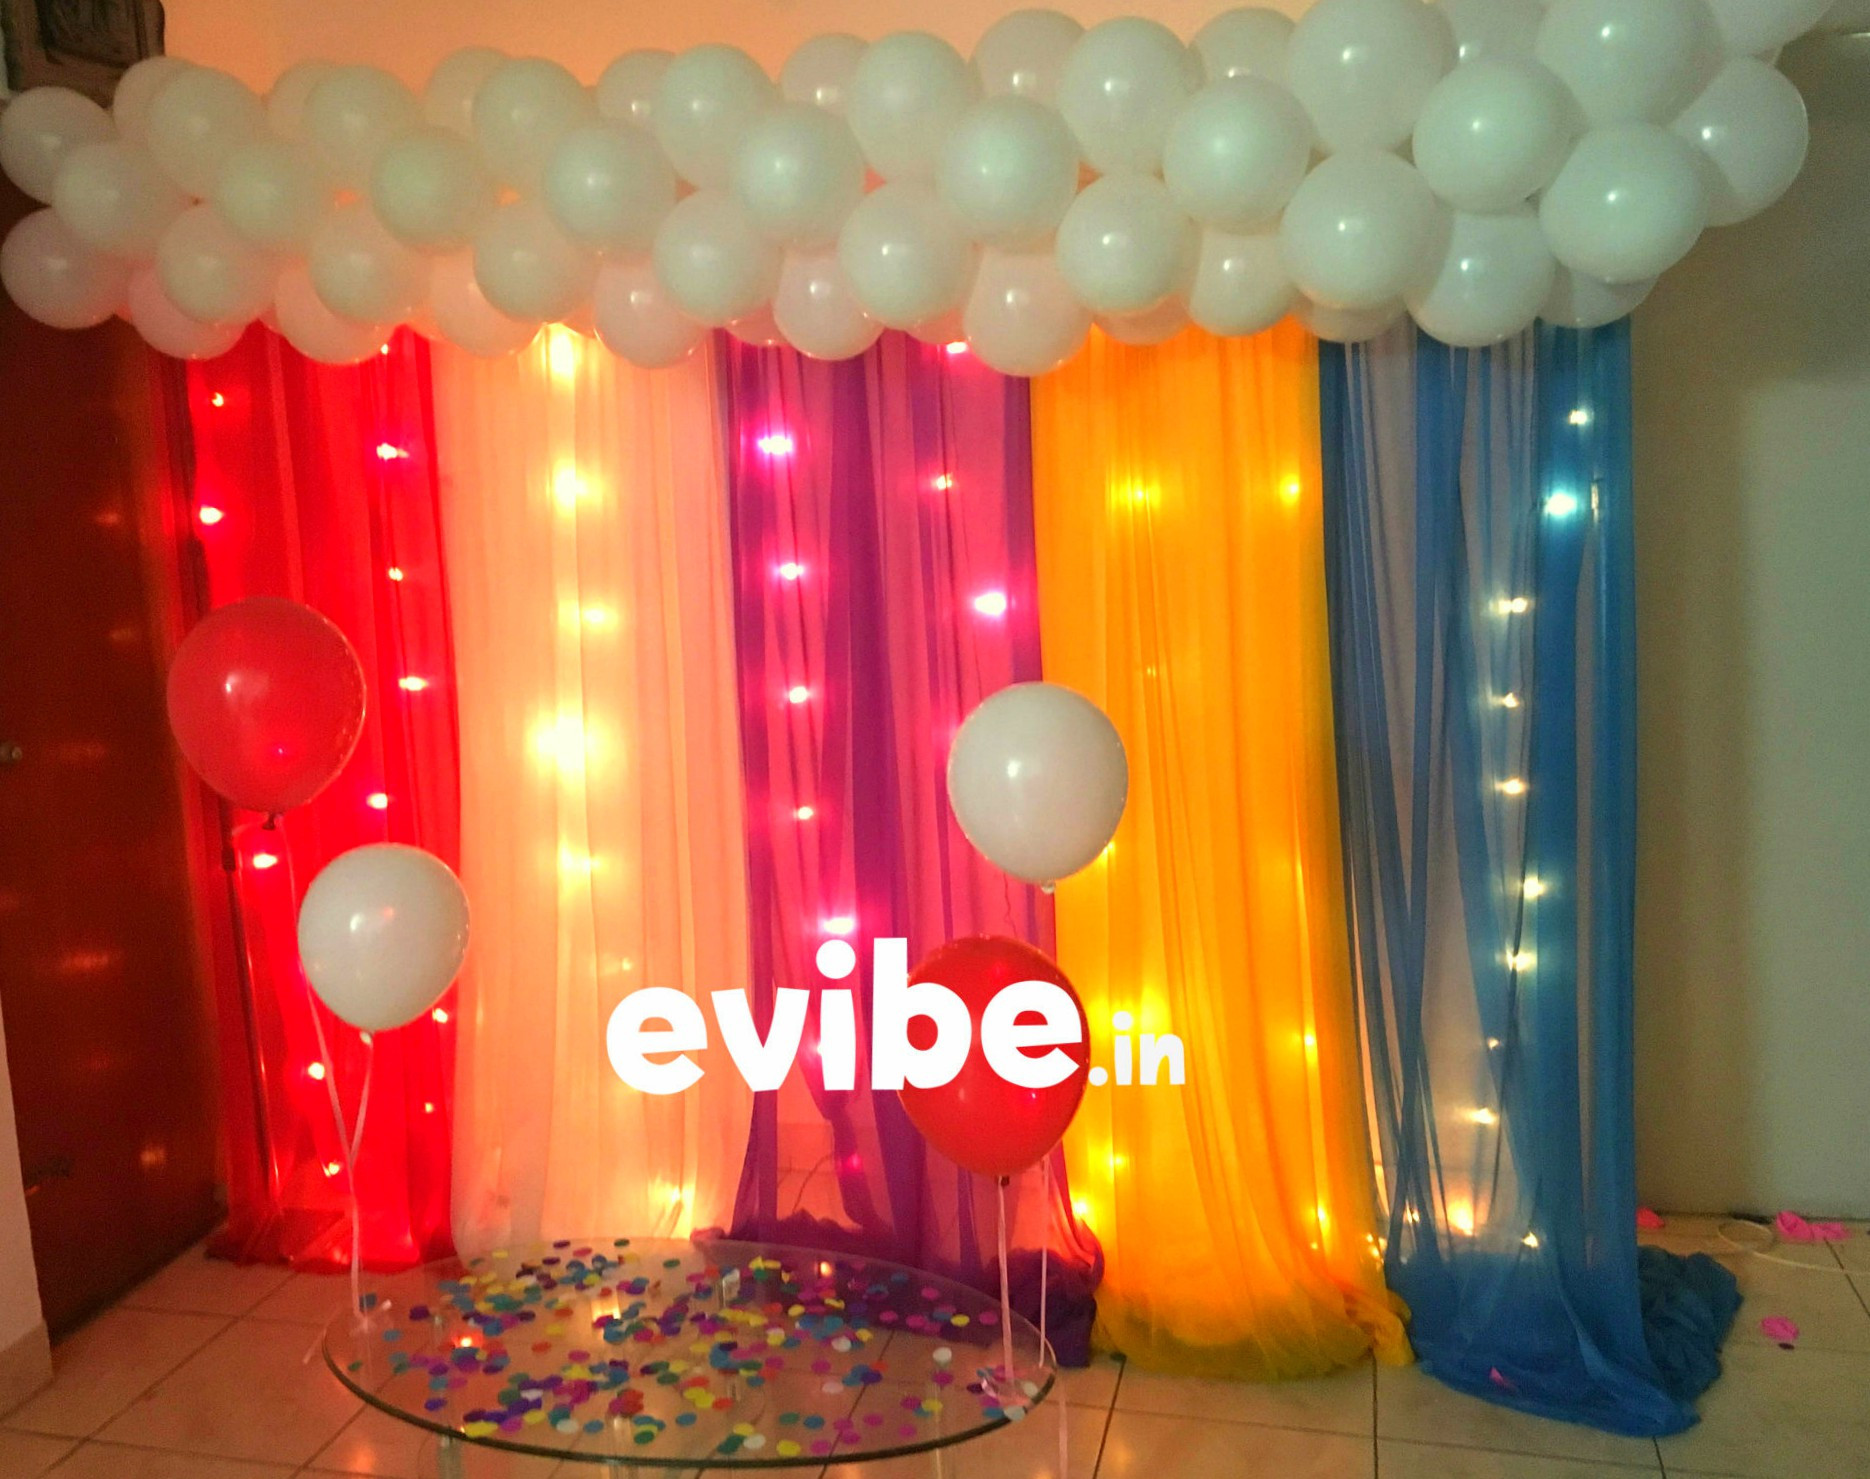 Birthday Party Decoration Ideas Simple
 Top 8 Simple Balloon Decorations For Birthday Party At